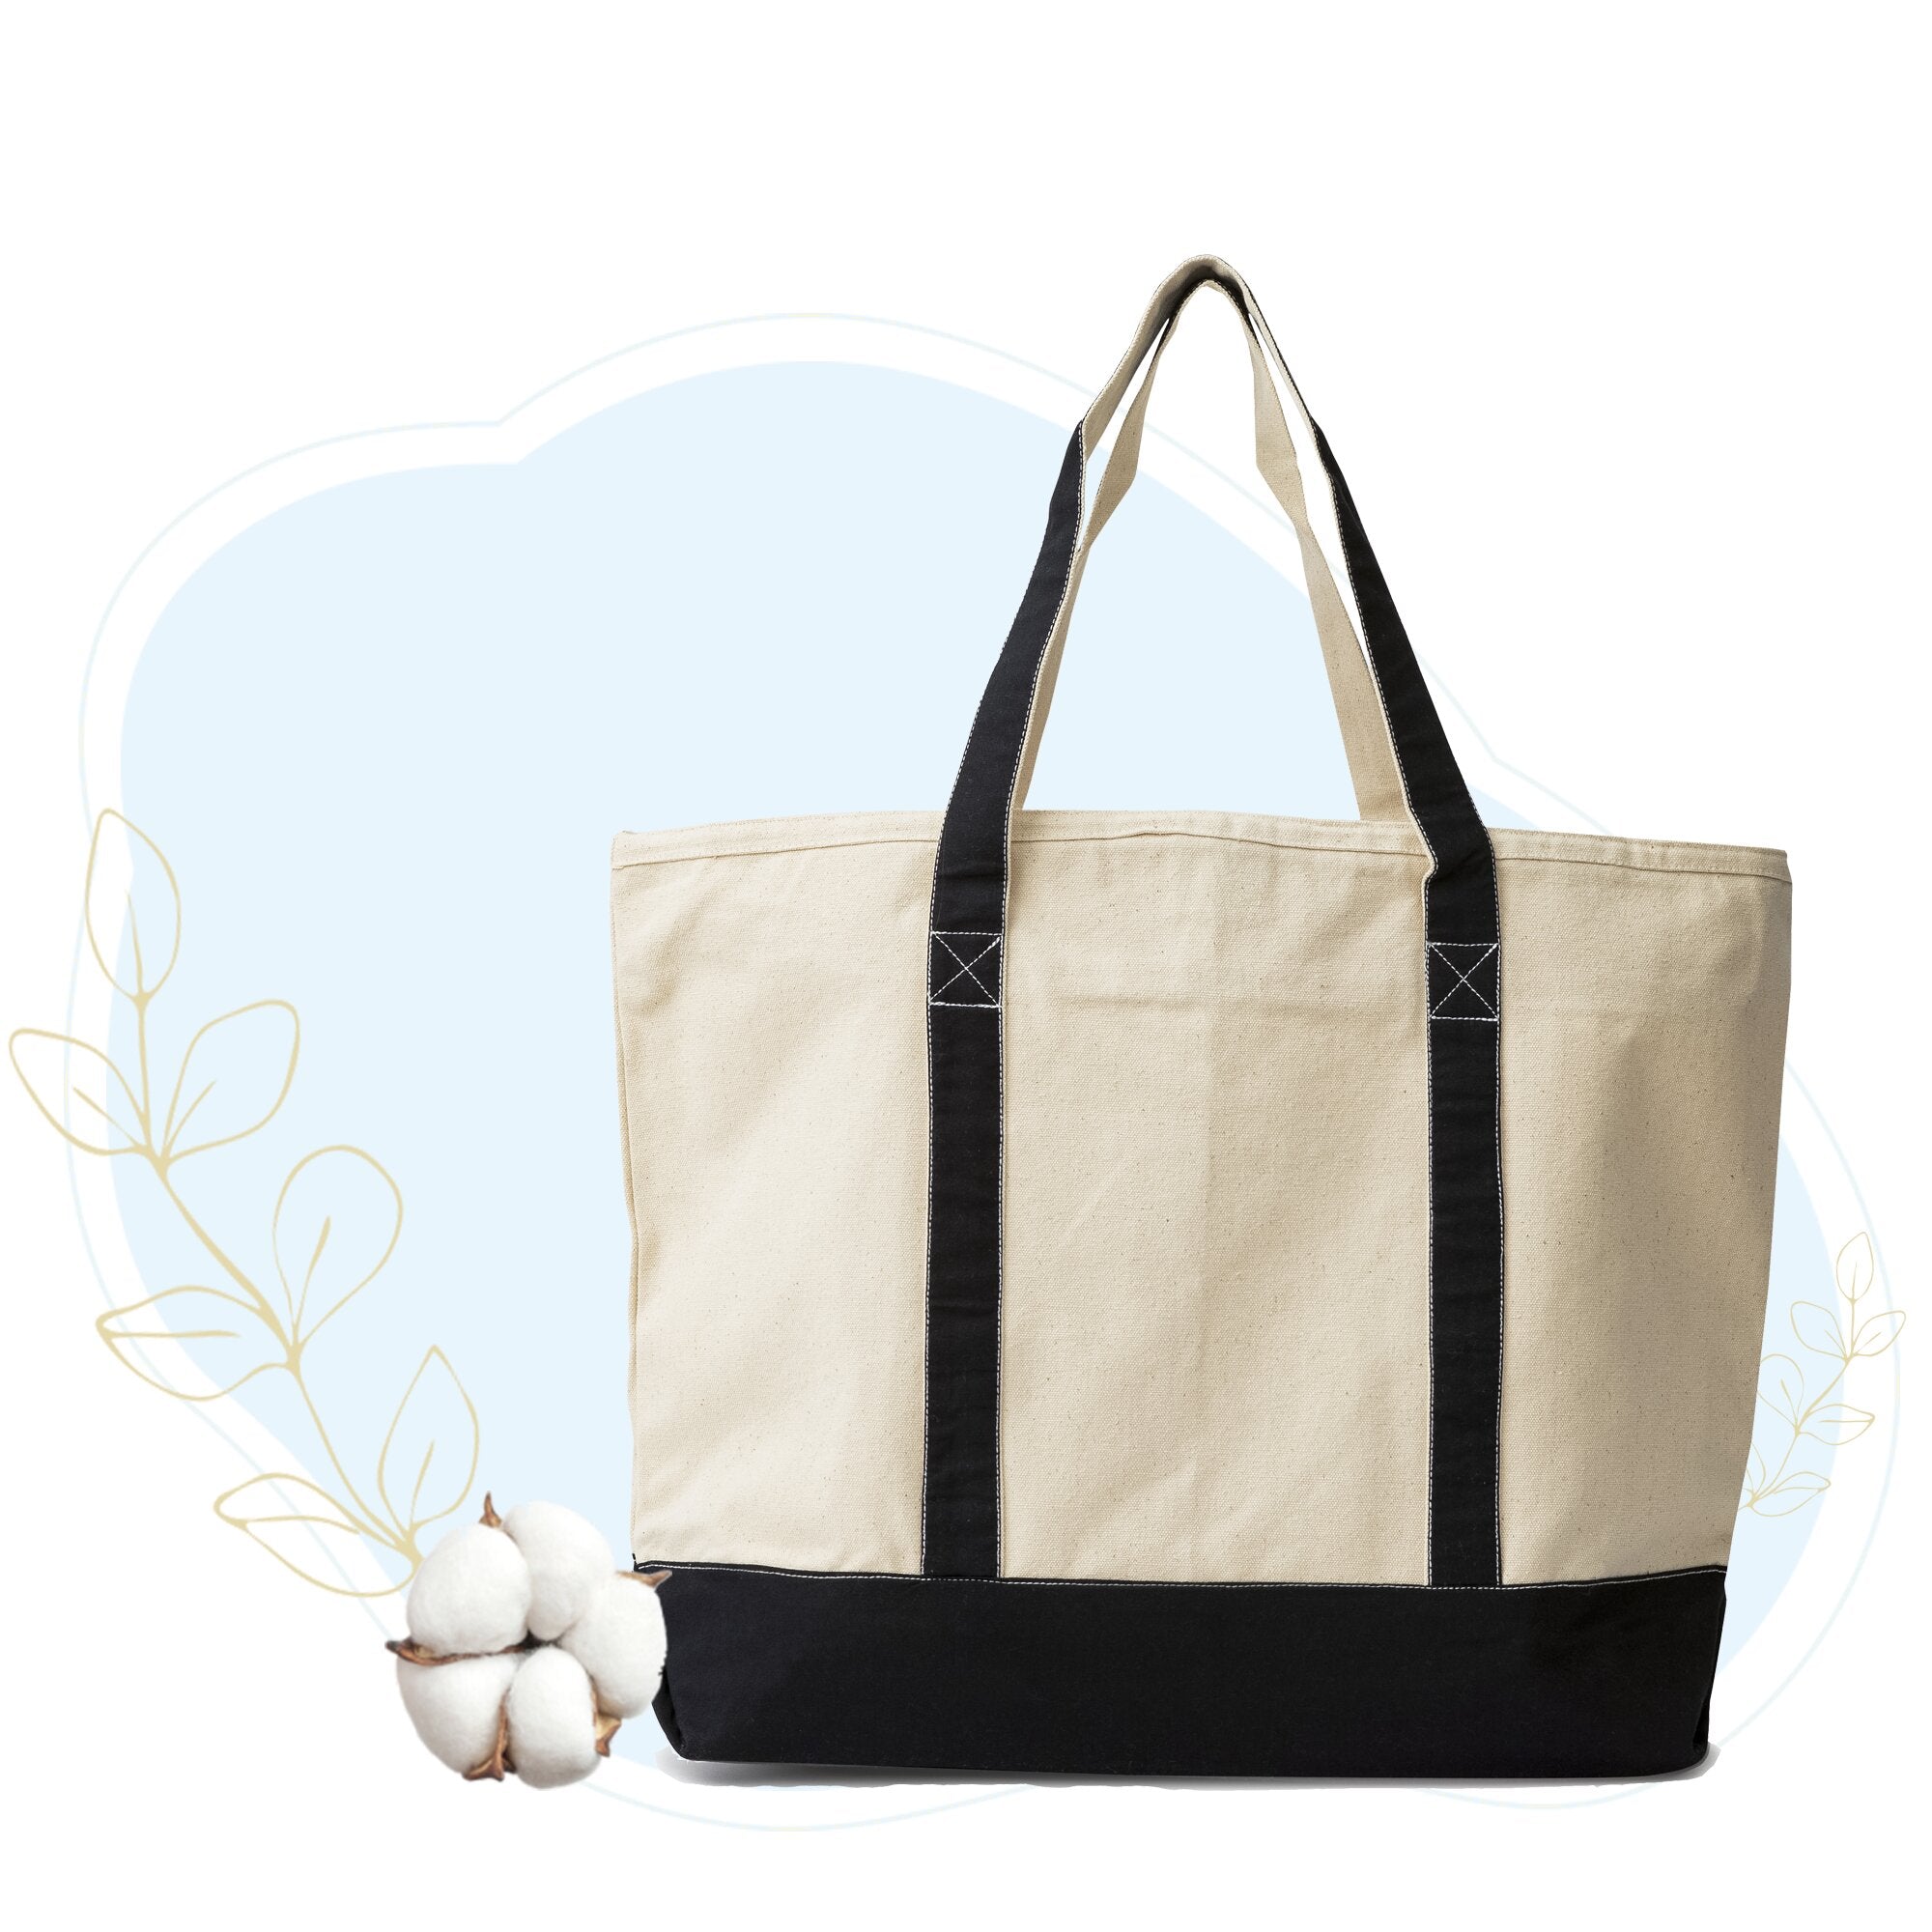 Large Everyday Tote Bag: Made For The Everyday